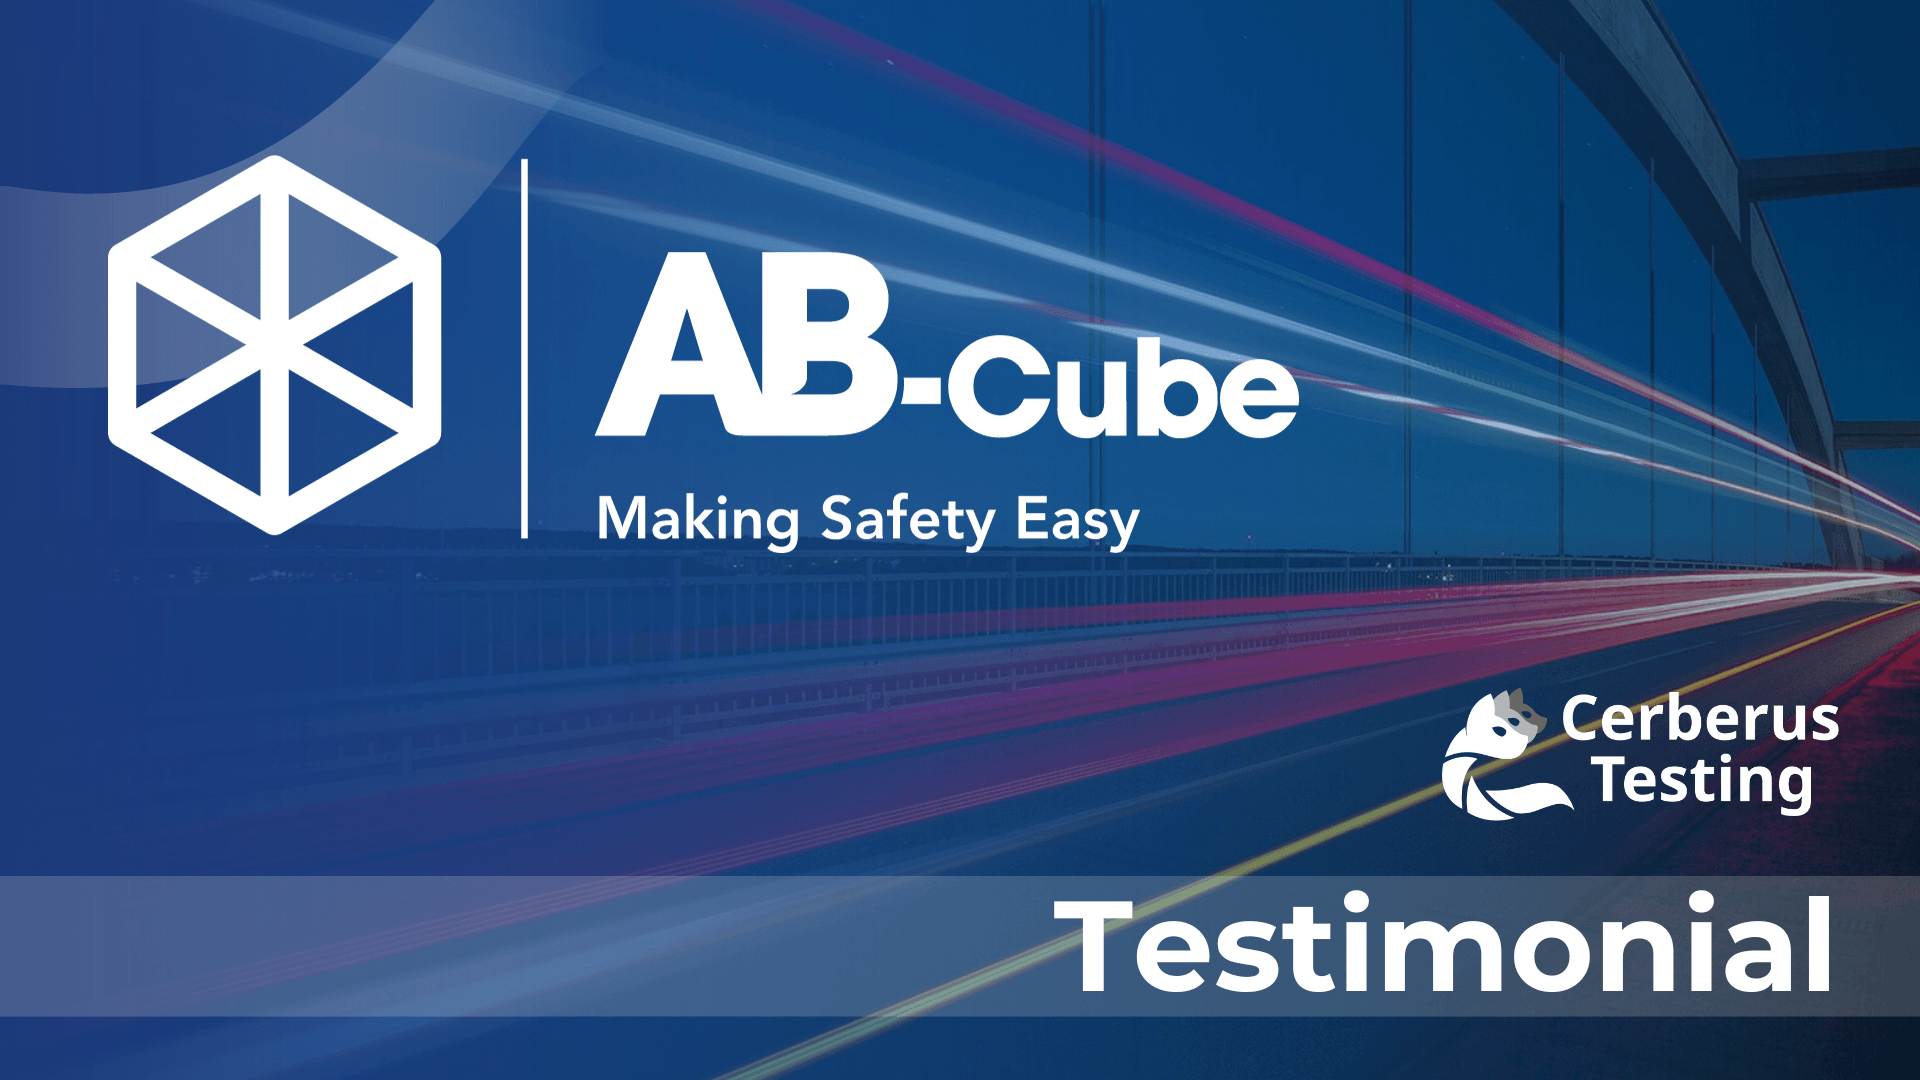 From 3 weeks to 3 hours of non-regression tests at AB Cube